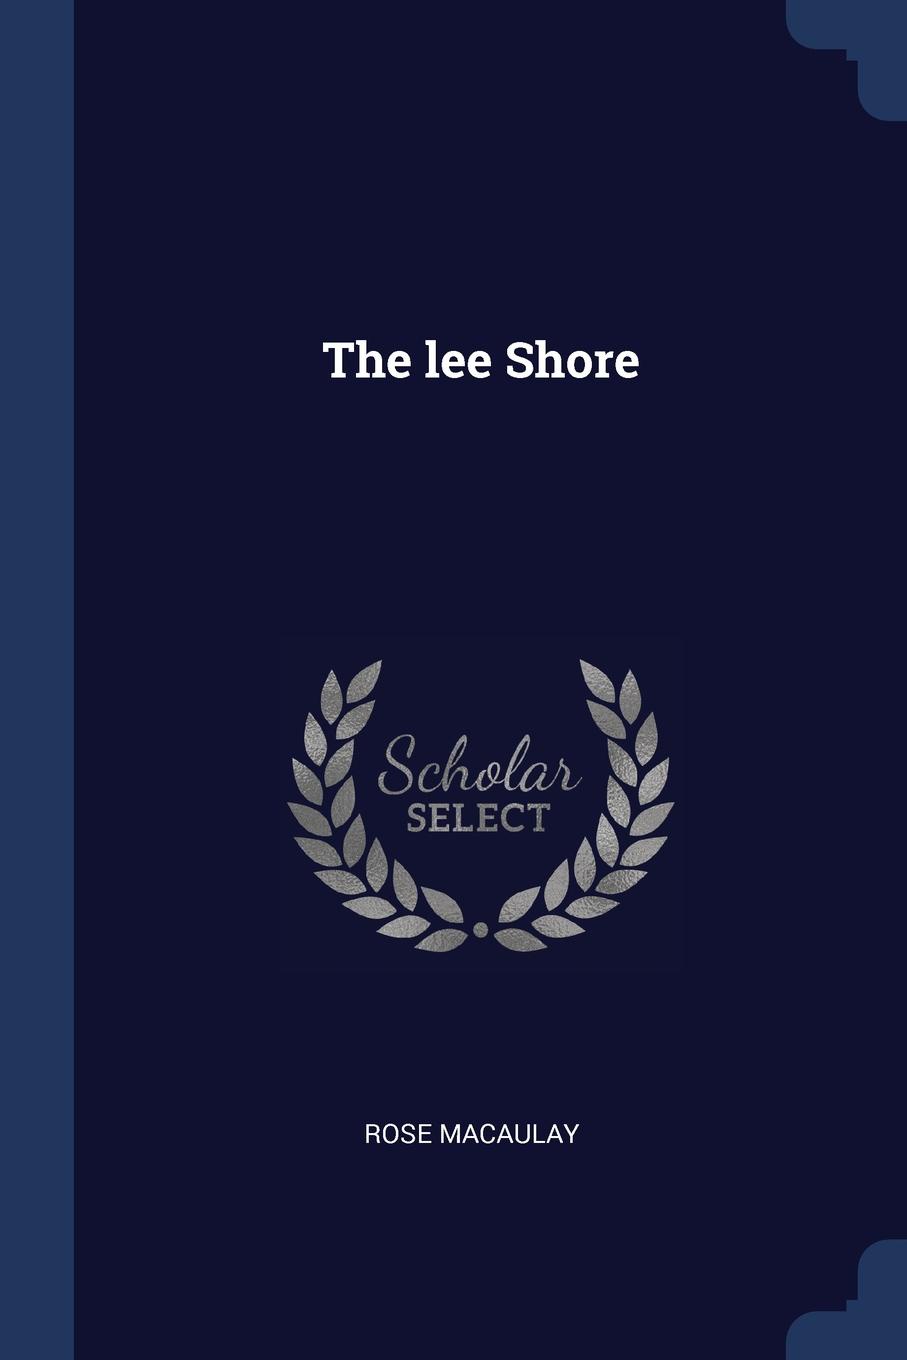 The lee Shore